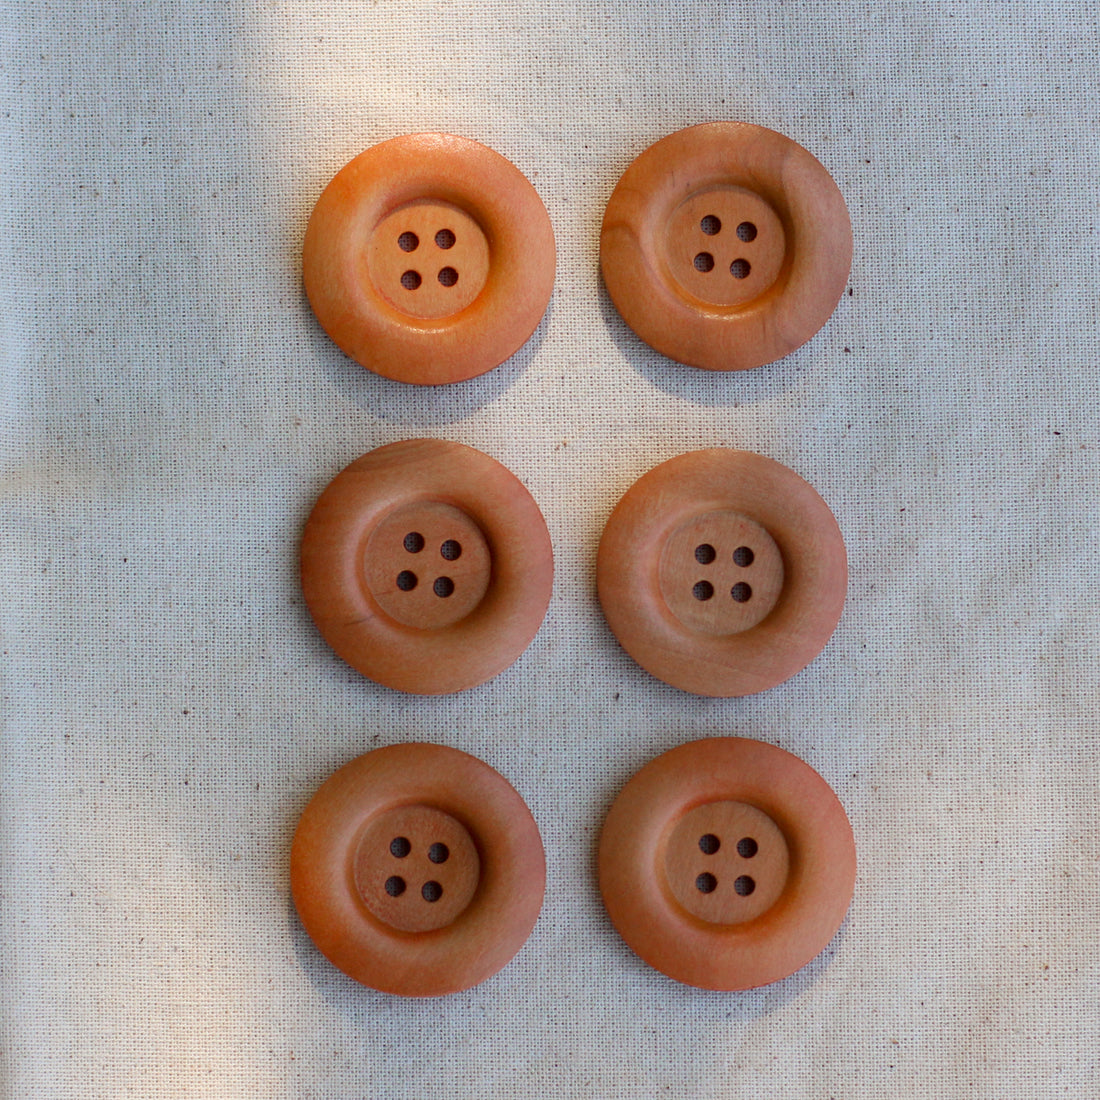 Set of 6 wooden buttons. Each button has four holes and is in a natural timber.